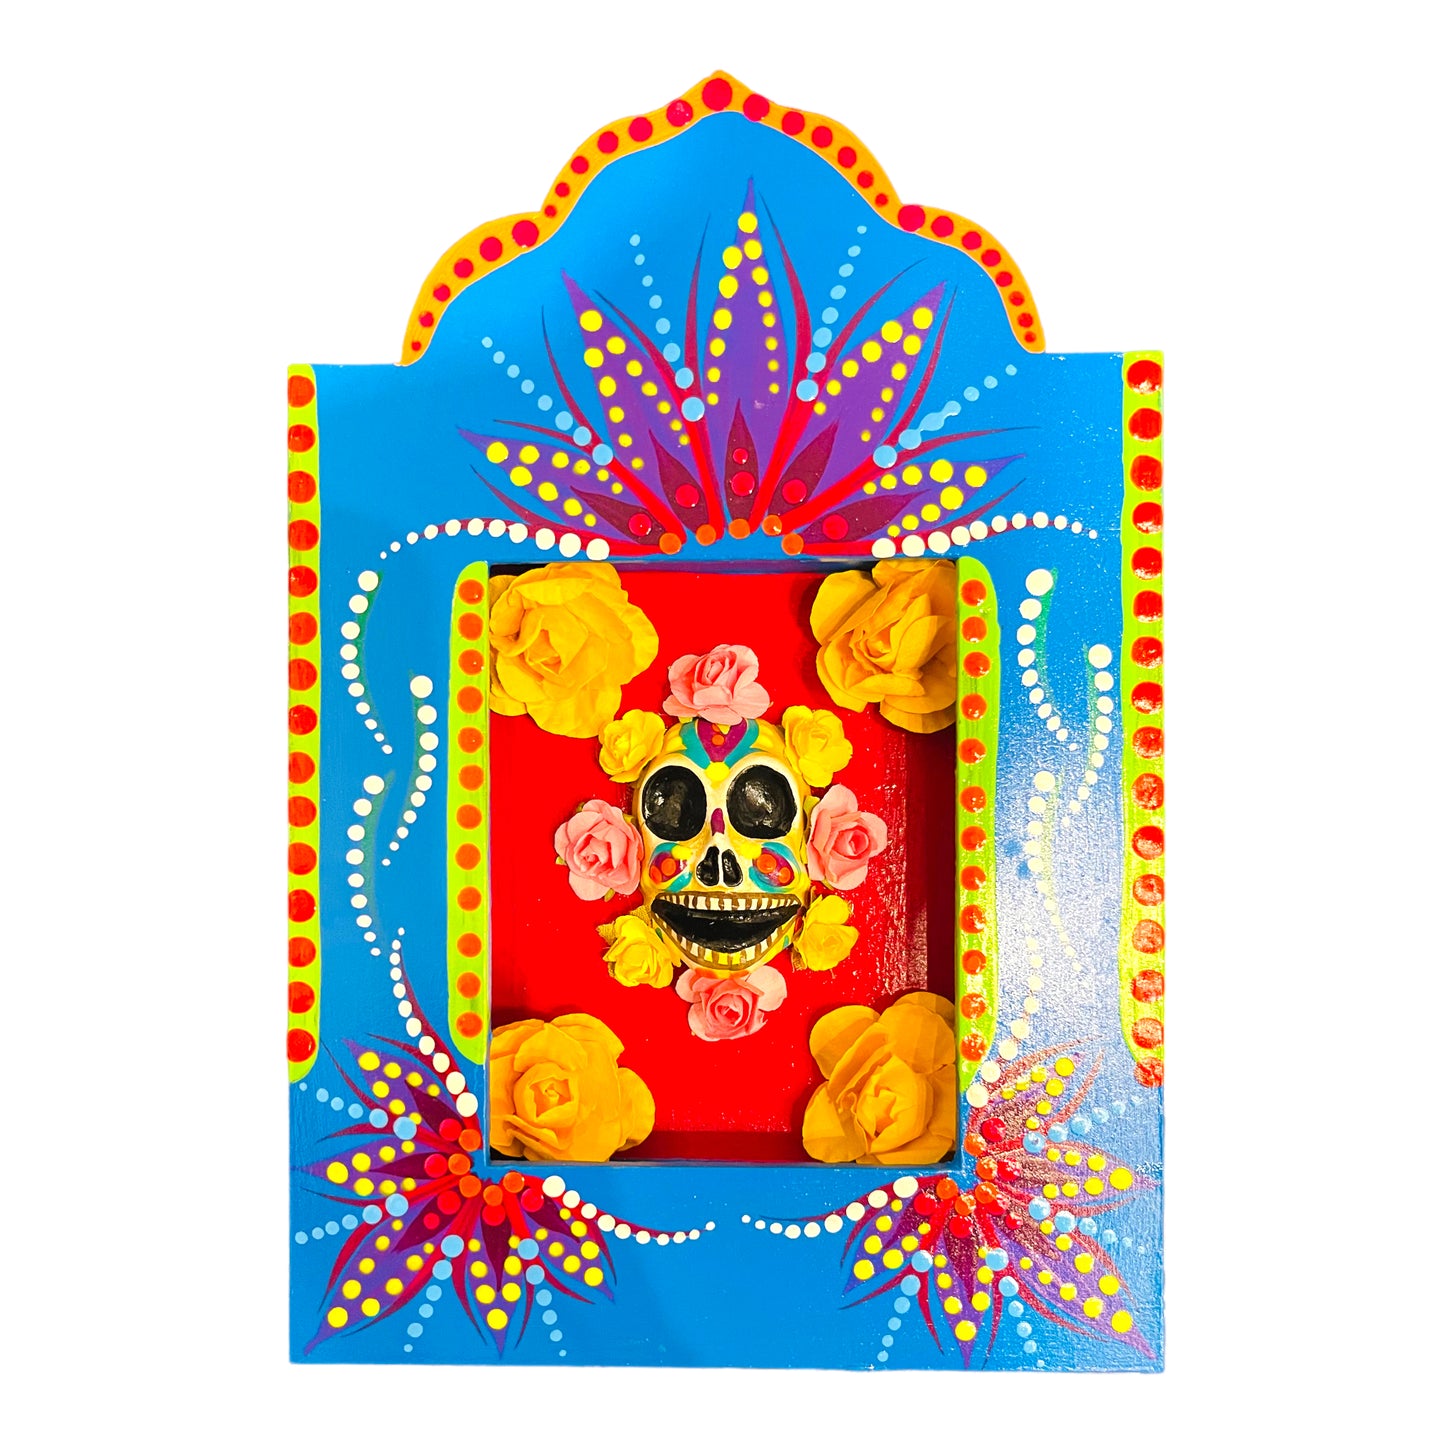 Blue hand painted cultural niche for home decor is handmade with a catrina in the center, and yellow paper roses with red background. Around are three purple flowers with blue and yellow dots of different sizes. 